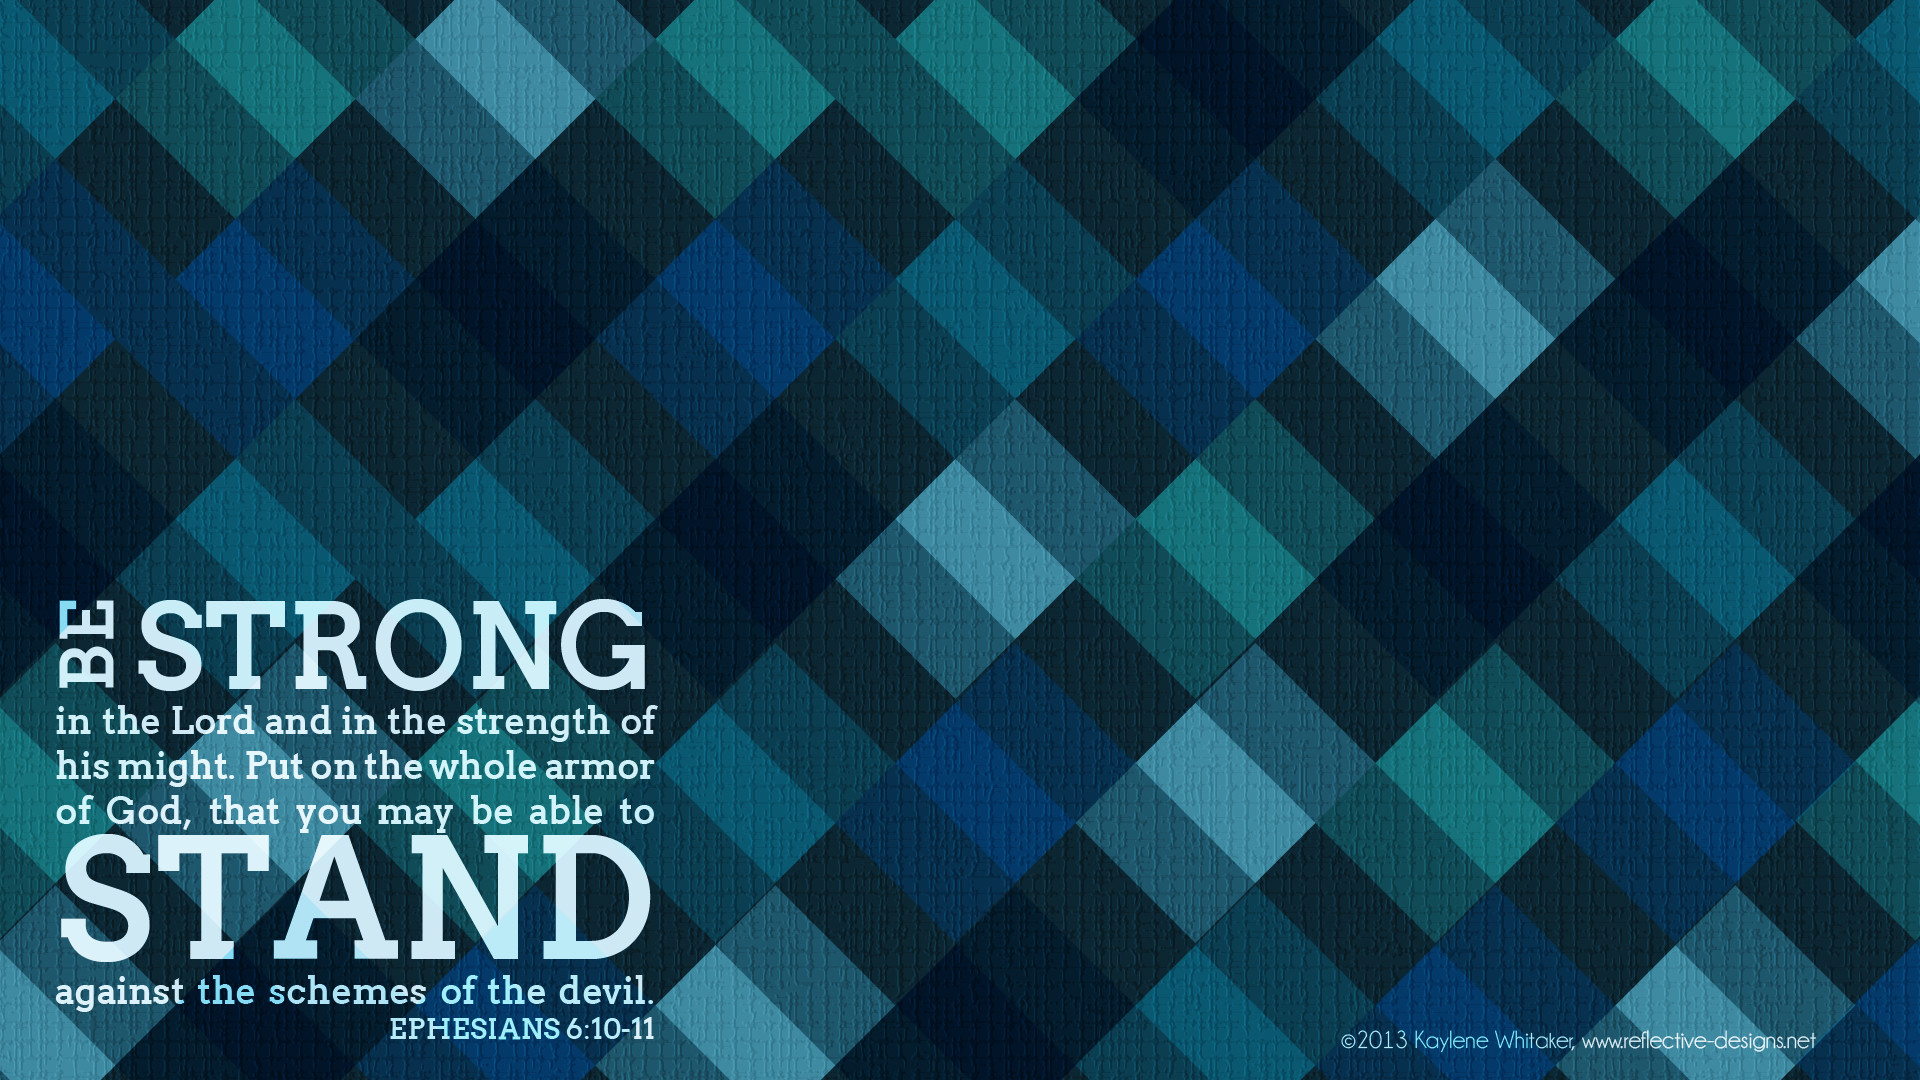 Be strong in the Lord desktop wallpaper from www.reflective designs.net